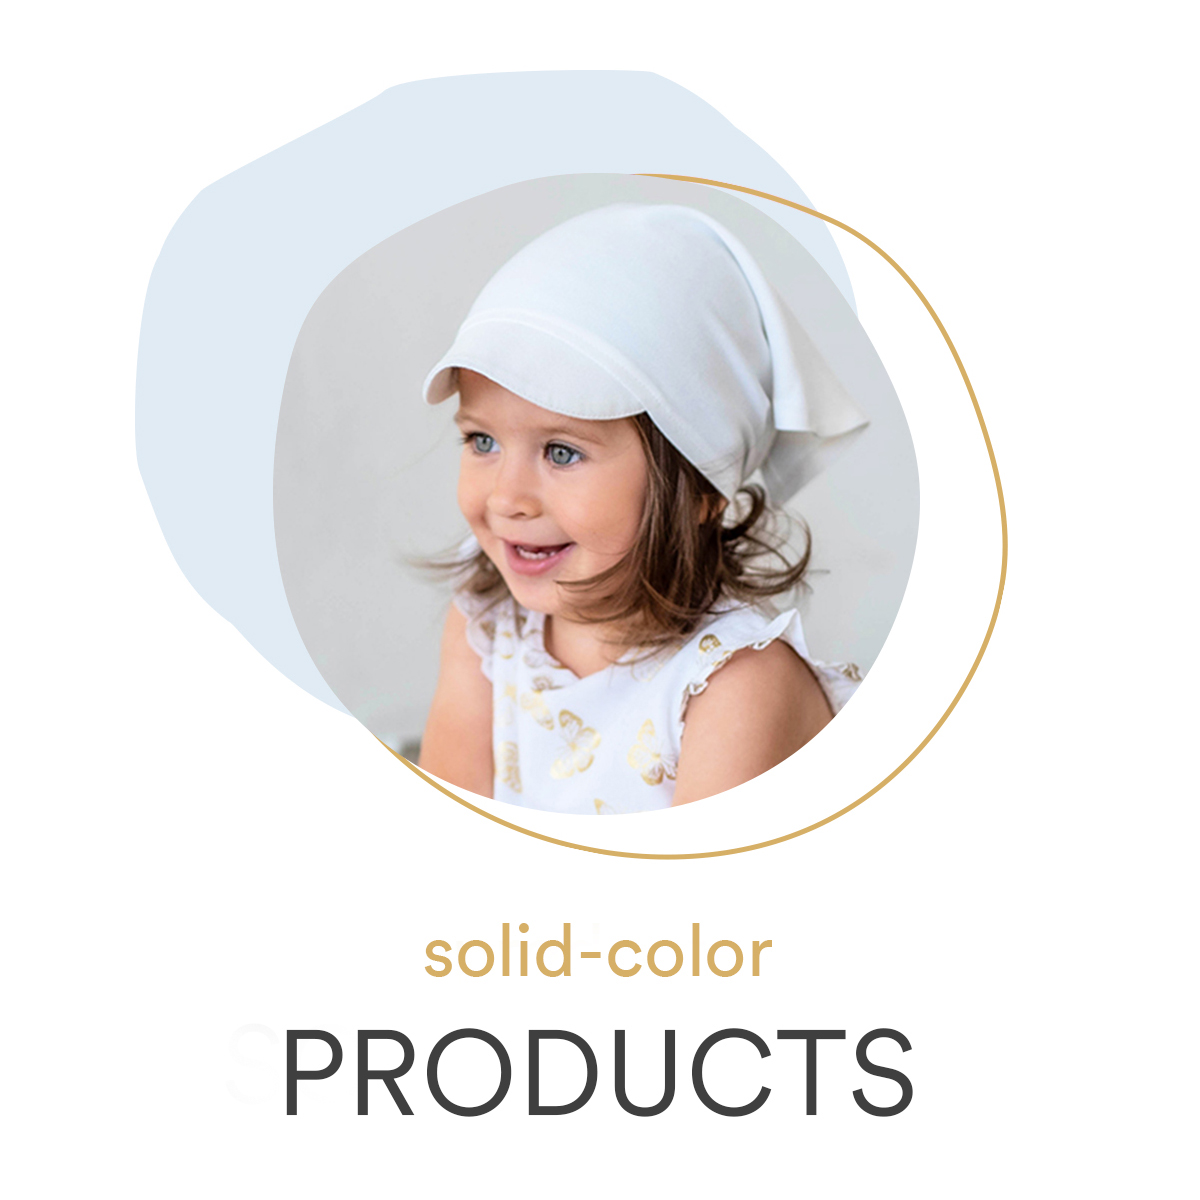 Solid-color products